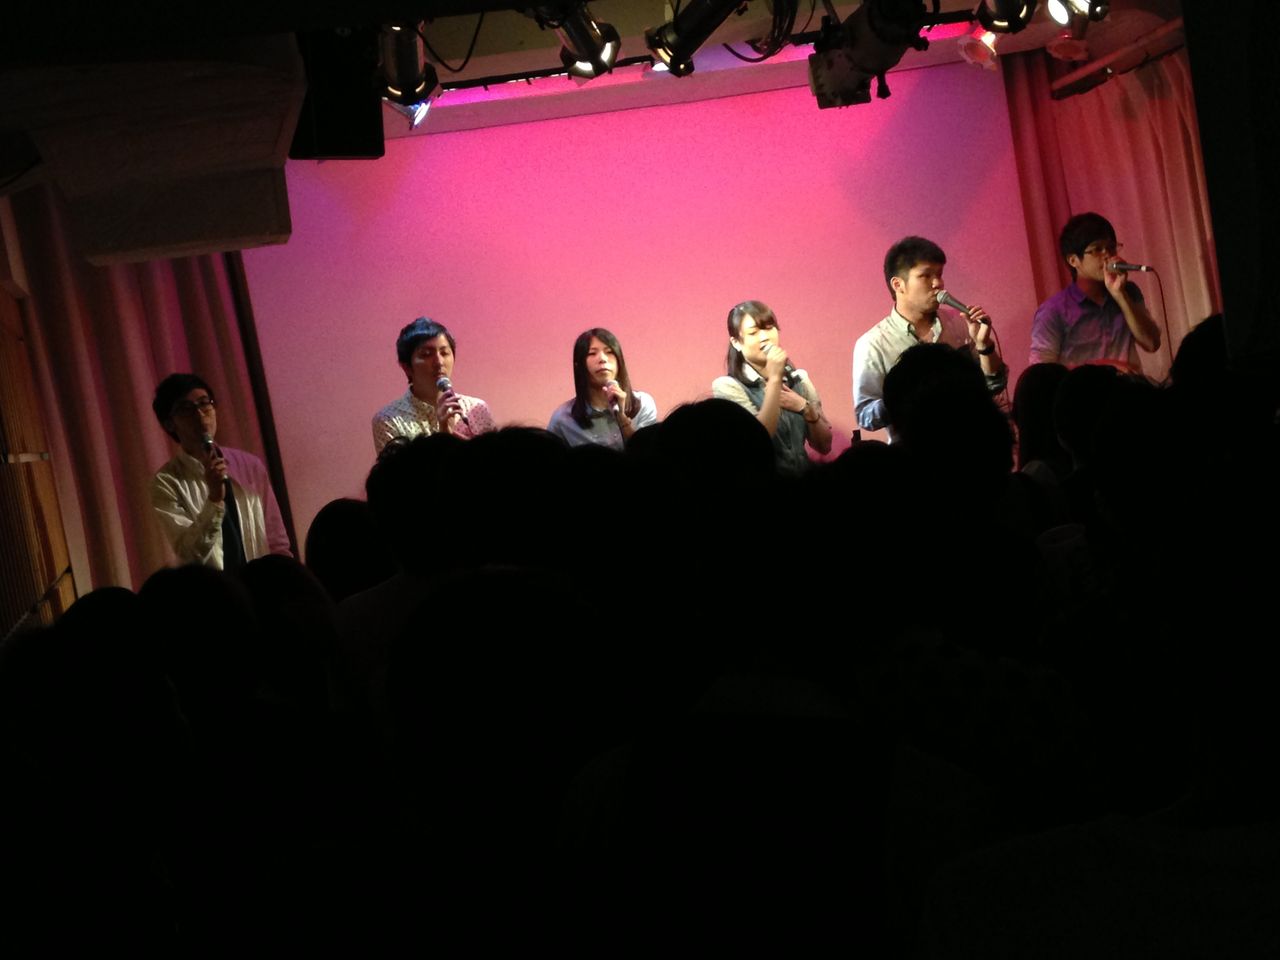 Monthly Live Take It Easy 40 たけれぽ アカペラライブ Take It Easy